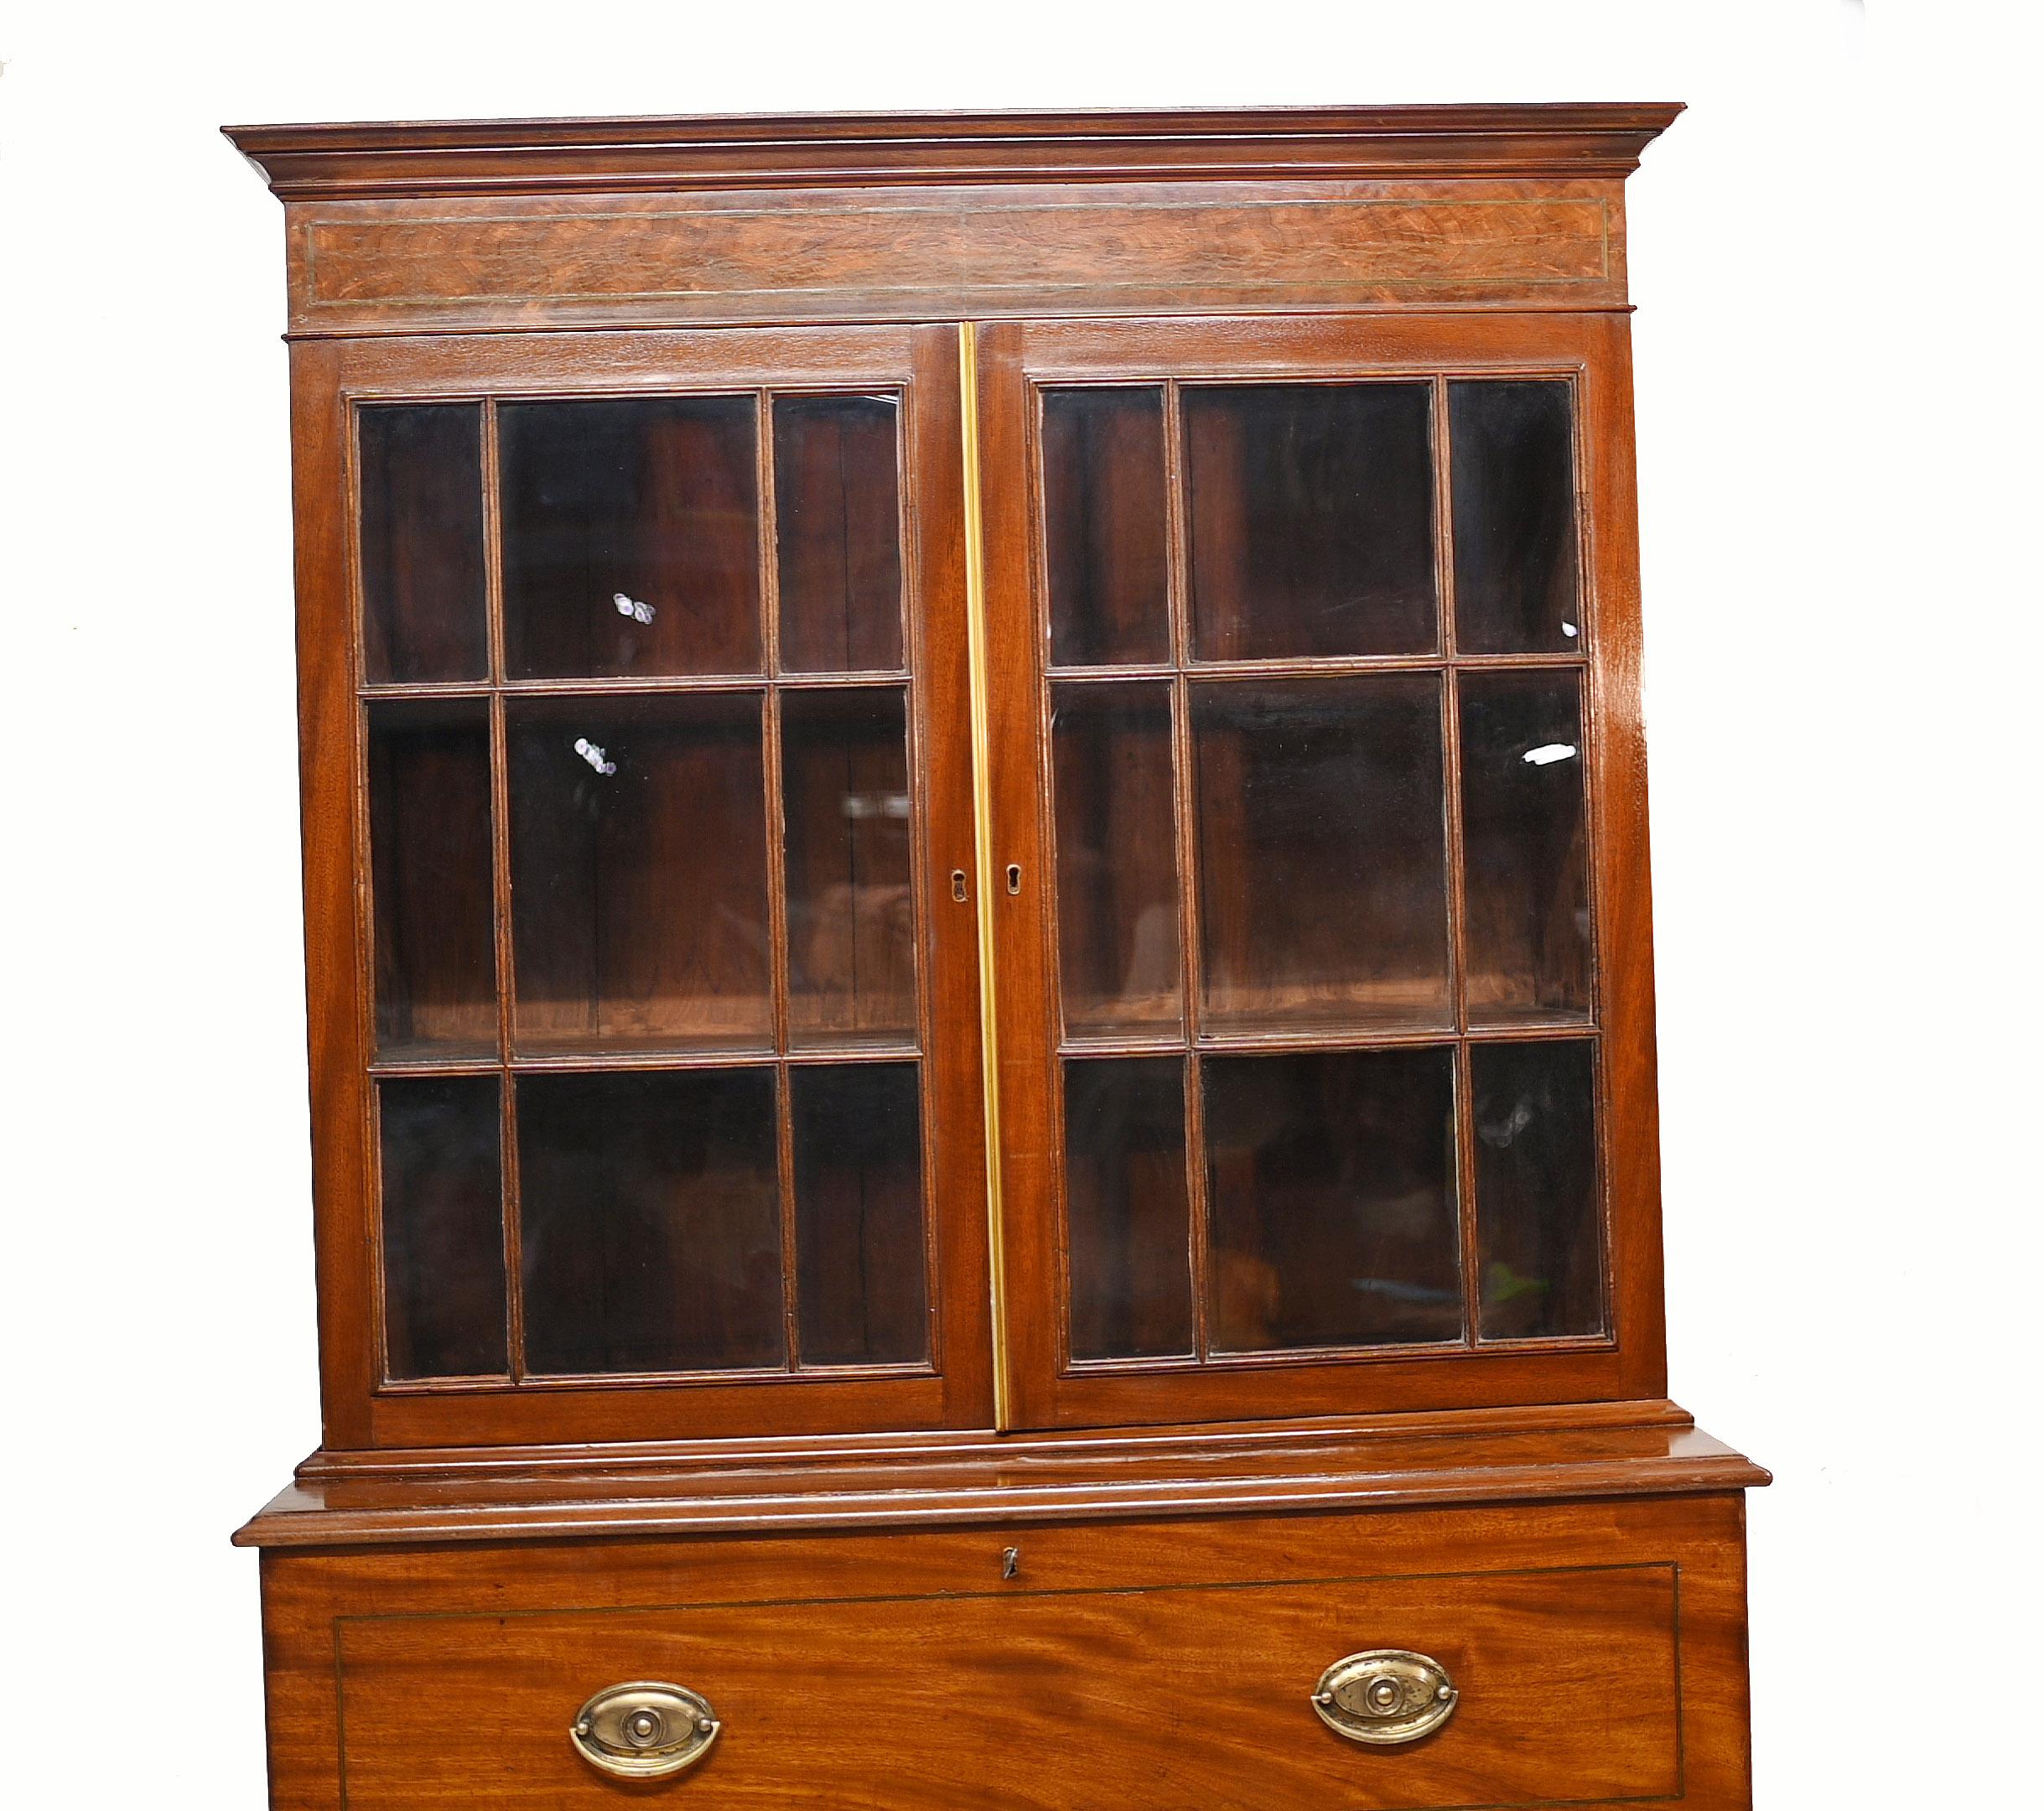 Elegant Georigian secretaire bookcase in mahogany
Stand out example of English furniture making, great piece as both a desk and a bookcase
Top half features the glass fronted cabinet for books and display pieces
Below this is the secretaire